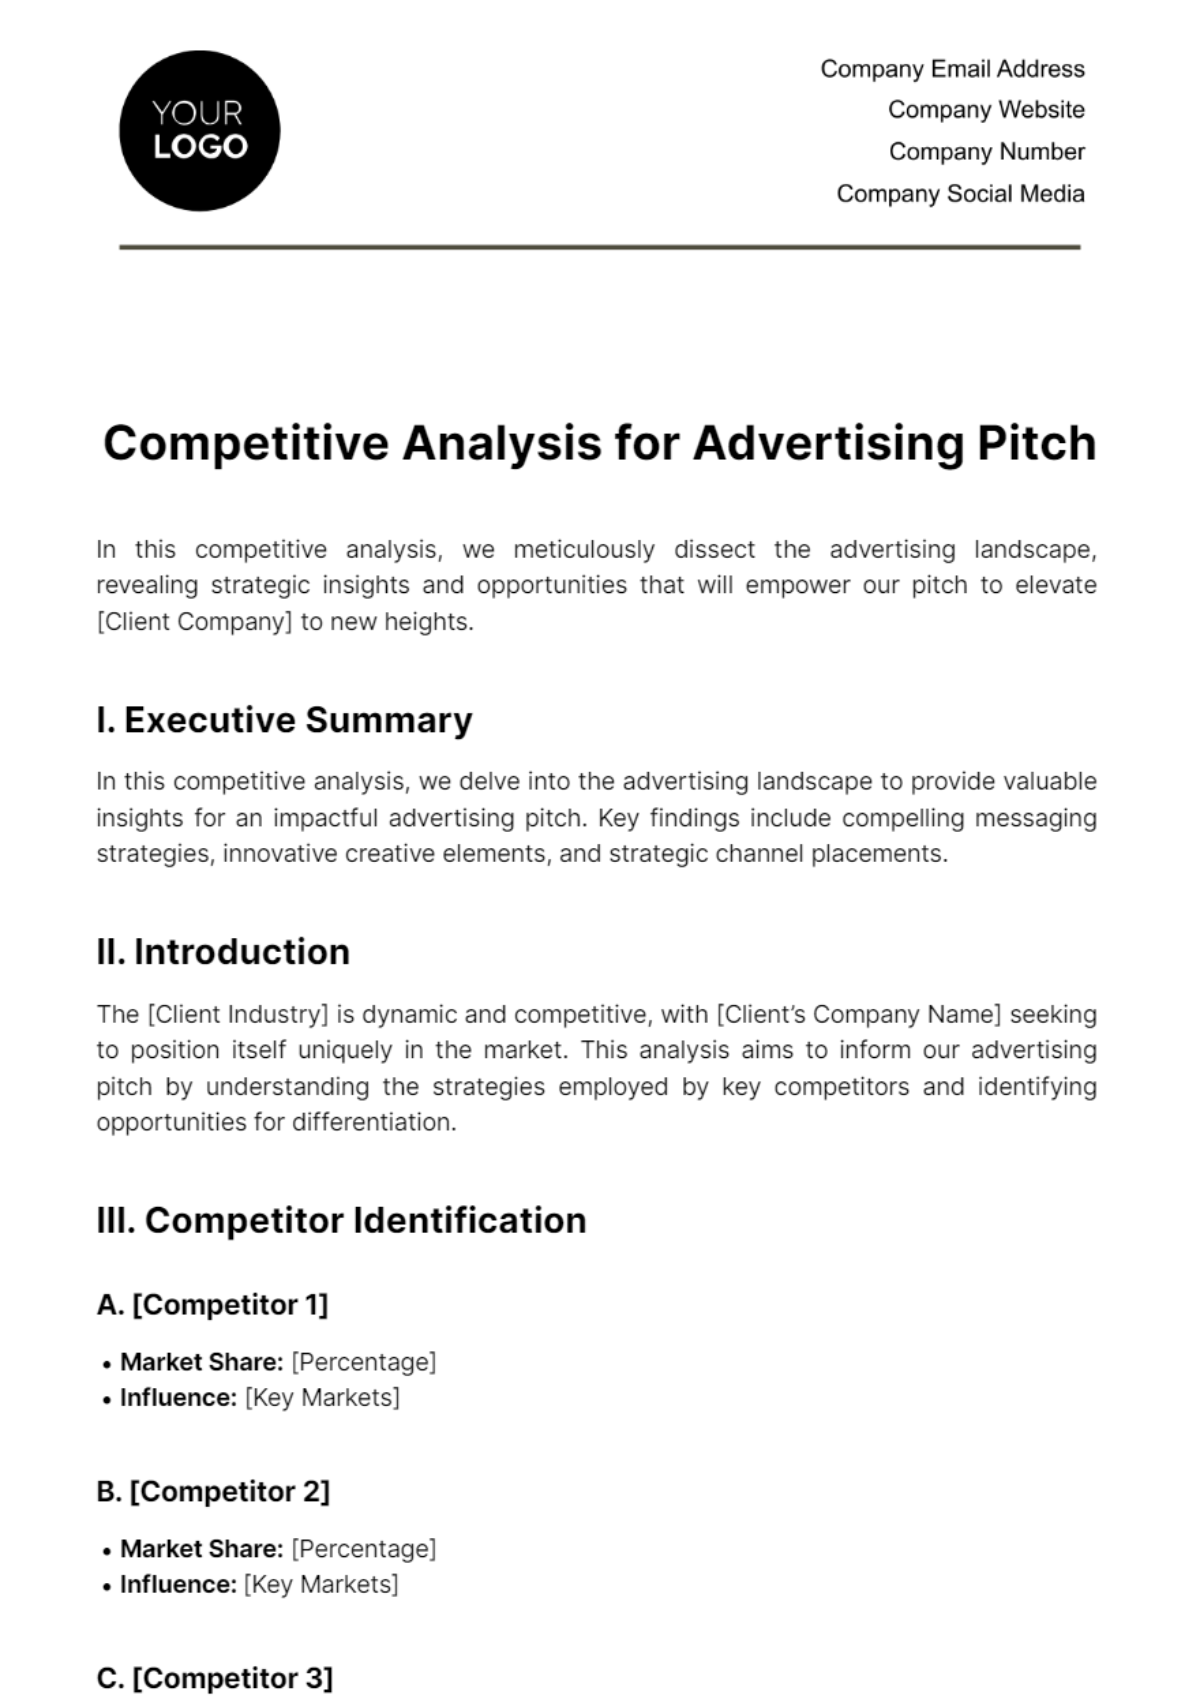 Competitive Analysis for Advertising Pitch Template